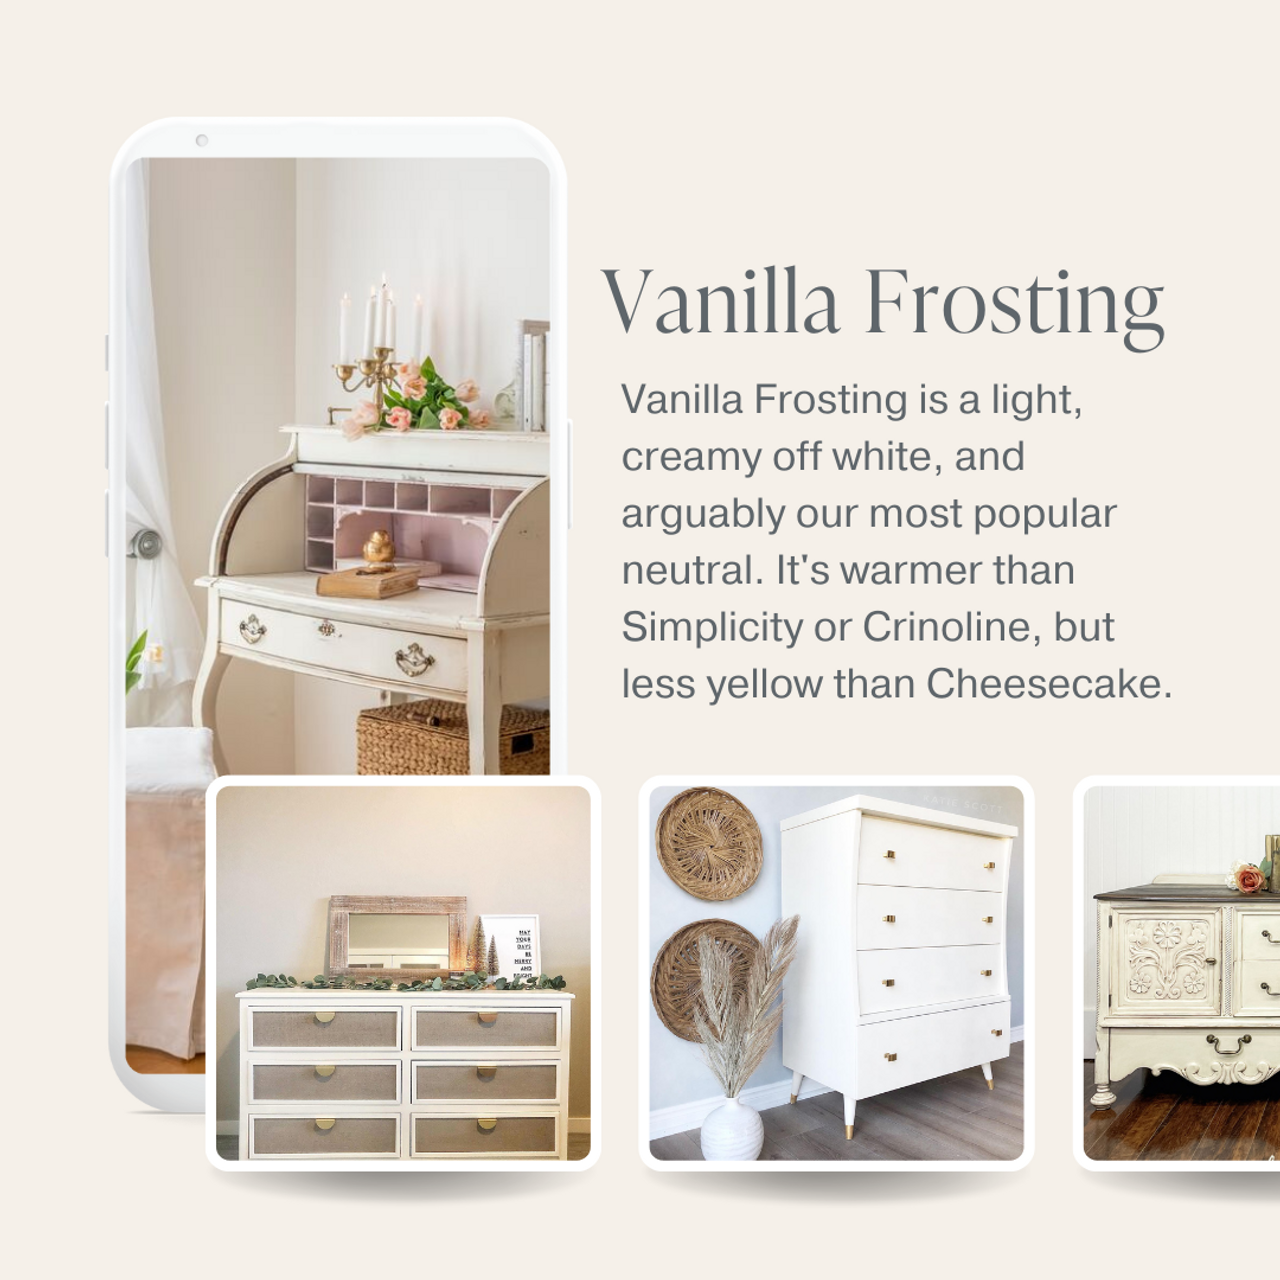 Country Chic - Vanilla Frosting – The Wild Hare Vintage